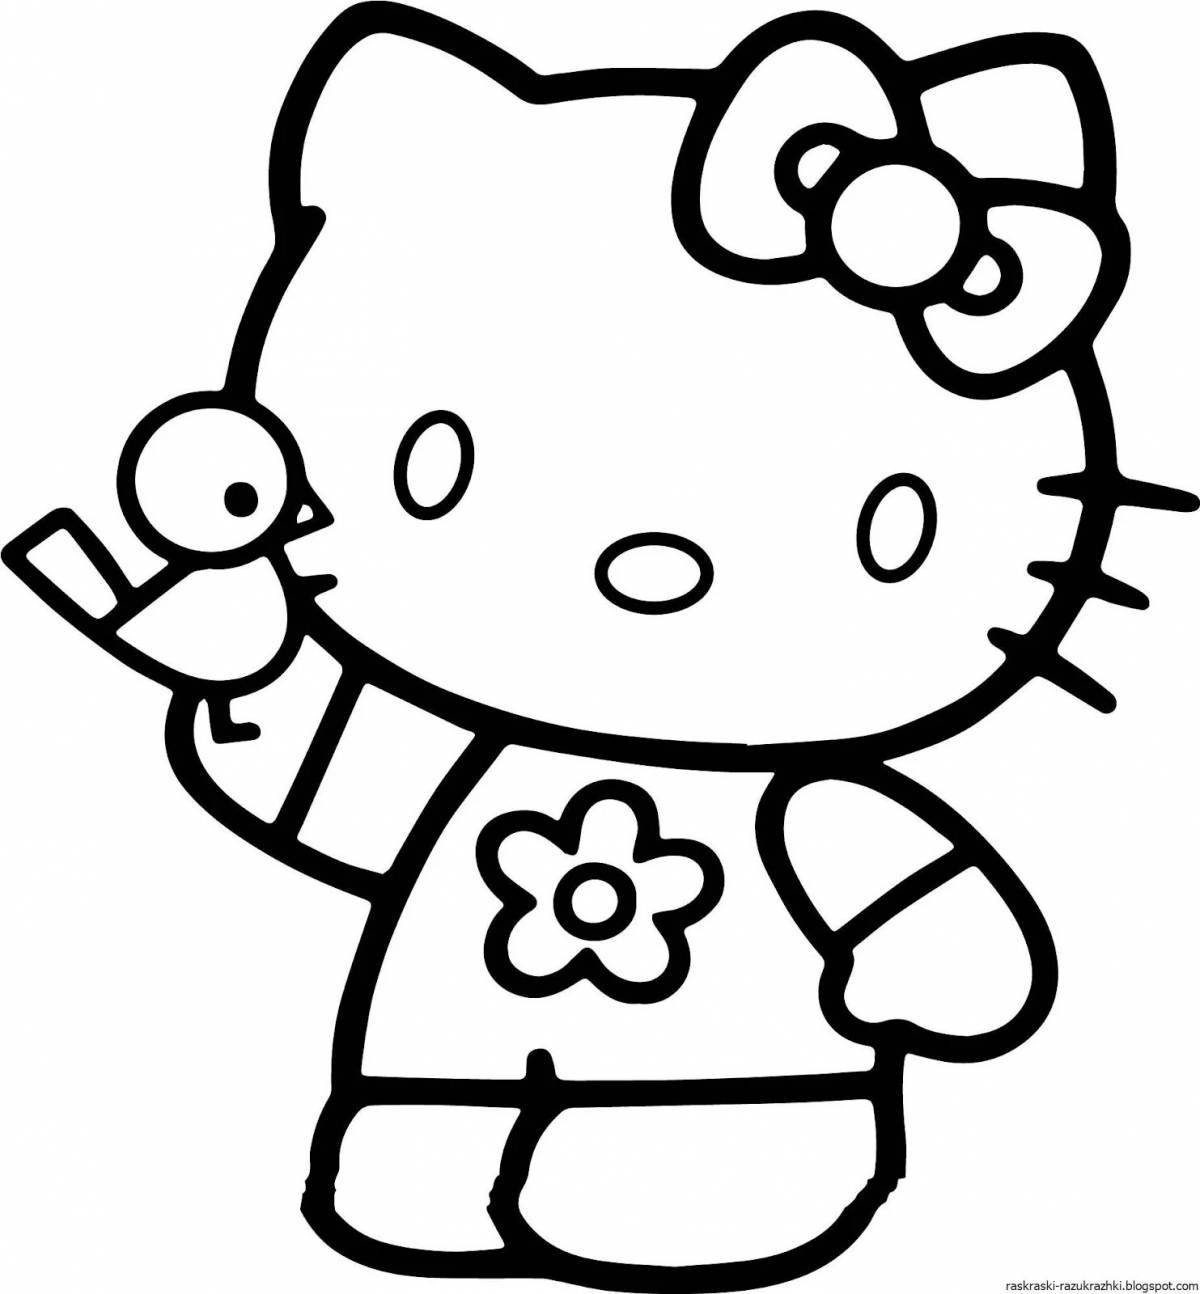 Color-frenzy coloring page for 3 year old girls